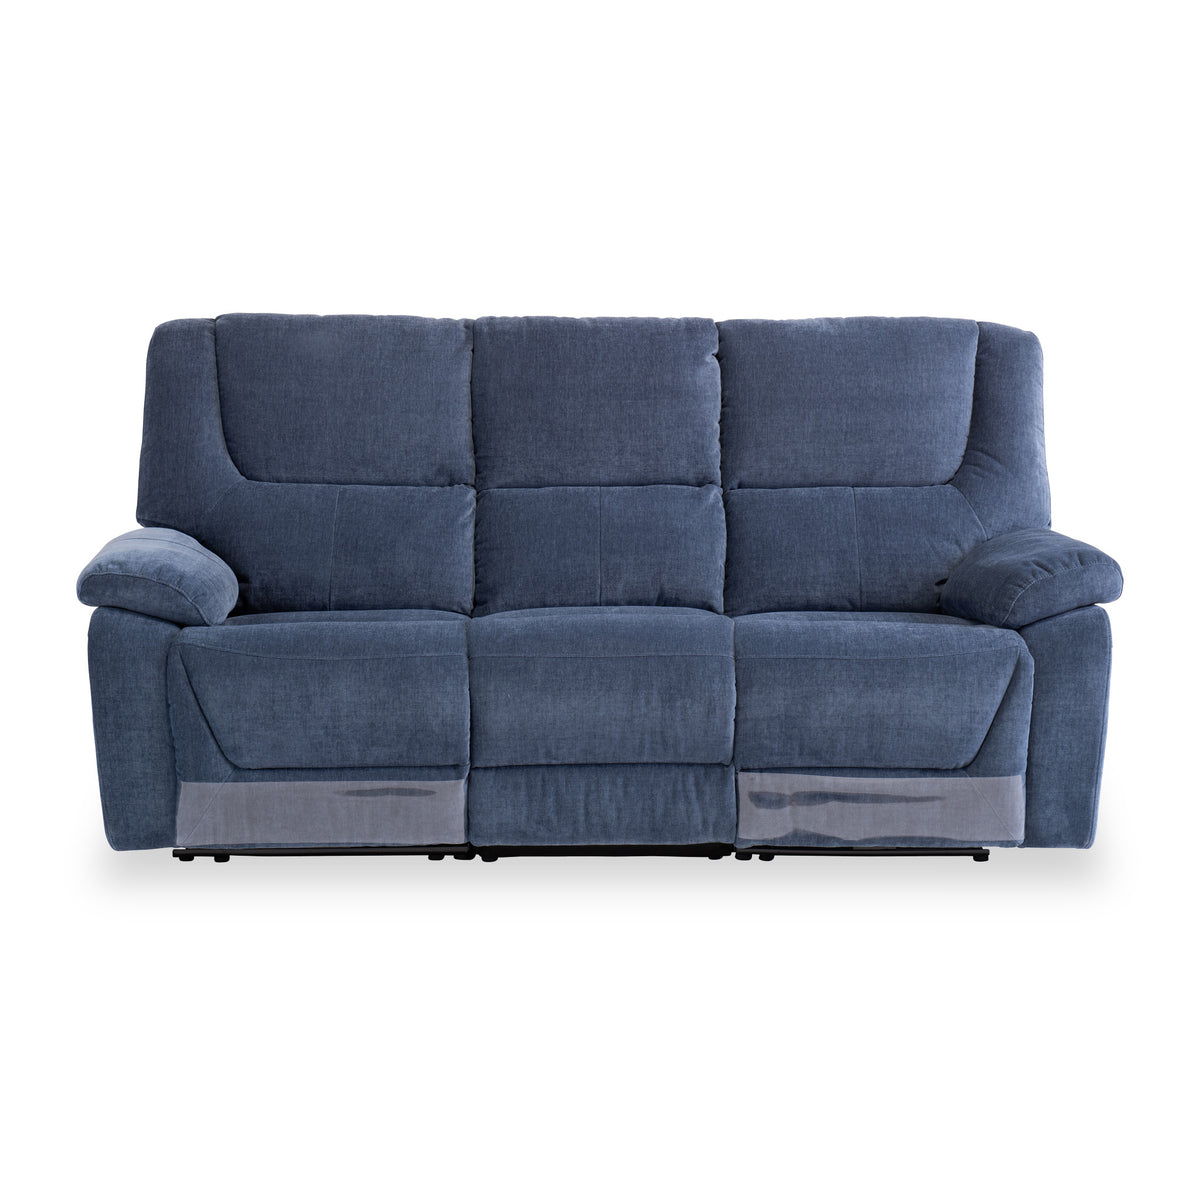 Barlow Blue Fabric Electric Reclining 3 Seater Sofa from roseland furniture